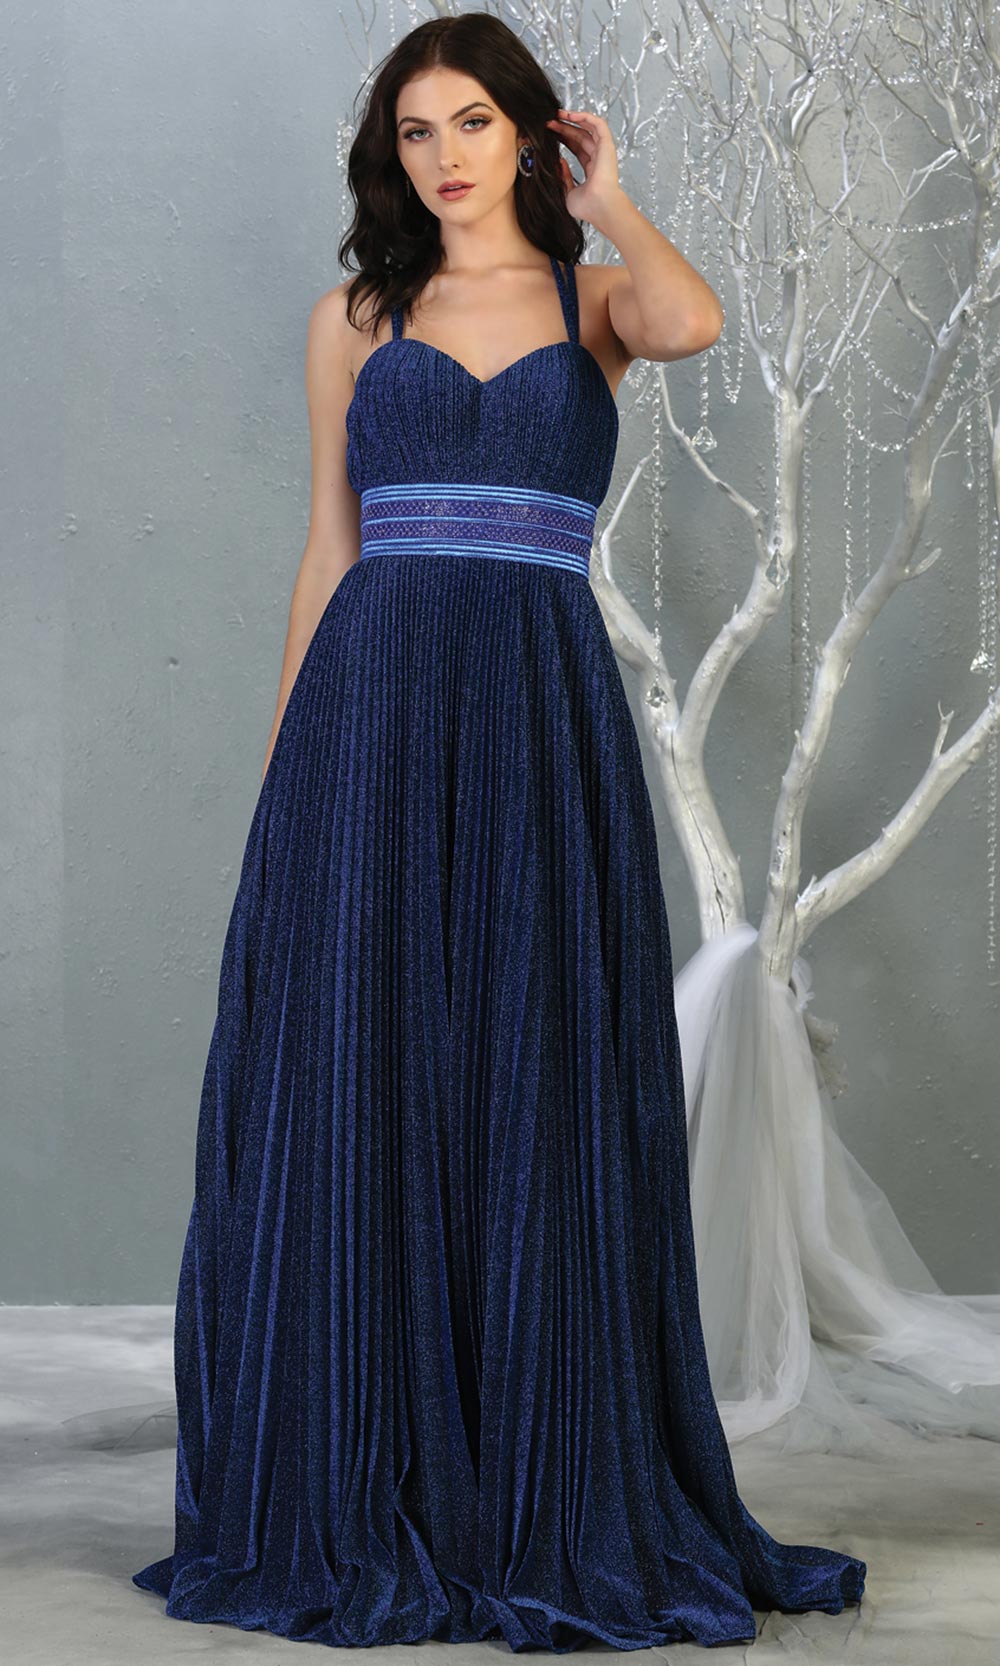 Mayqueen RQ7869 long royal blue metallic scoop neck evening gown w/straps & crinkle skirt.Full length flowy dress is perfect for  enagagement/e-shoot dress,formal wedding guest, evening party dress, prom, bridesmaids, black tie, gala. Plus sizes avail.jpg